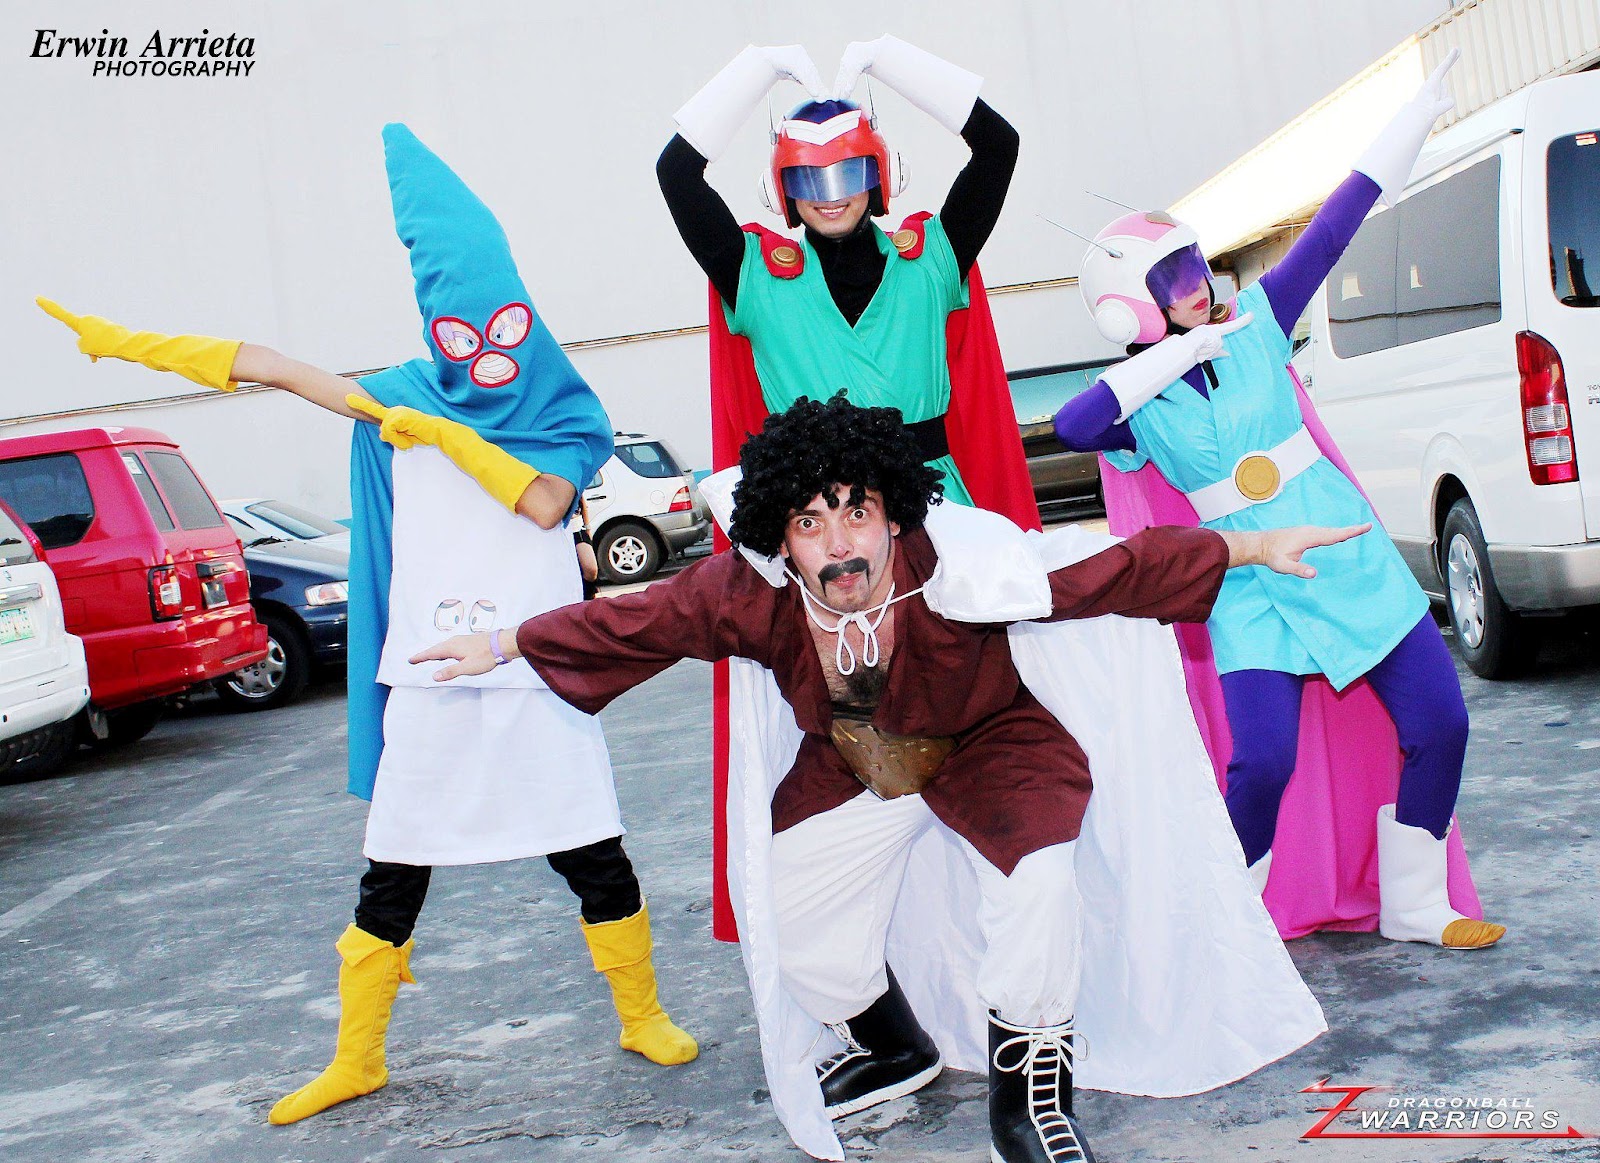 of the Z Warrior cosplay group as Master Pogi or Mr. Satan although I would...